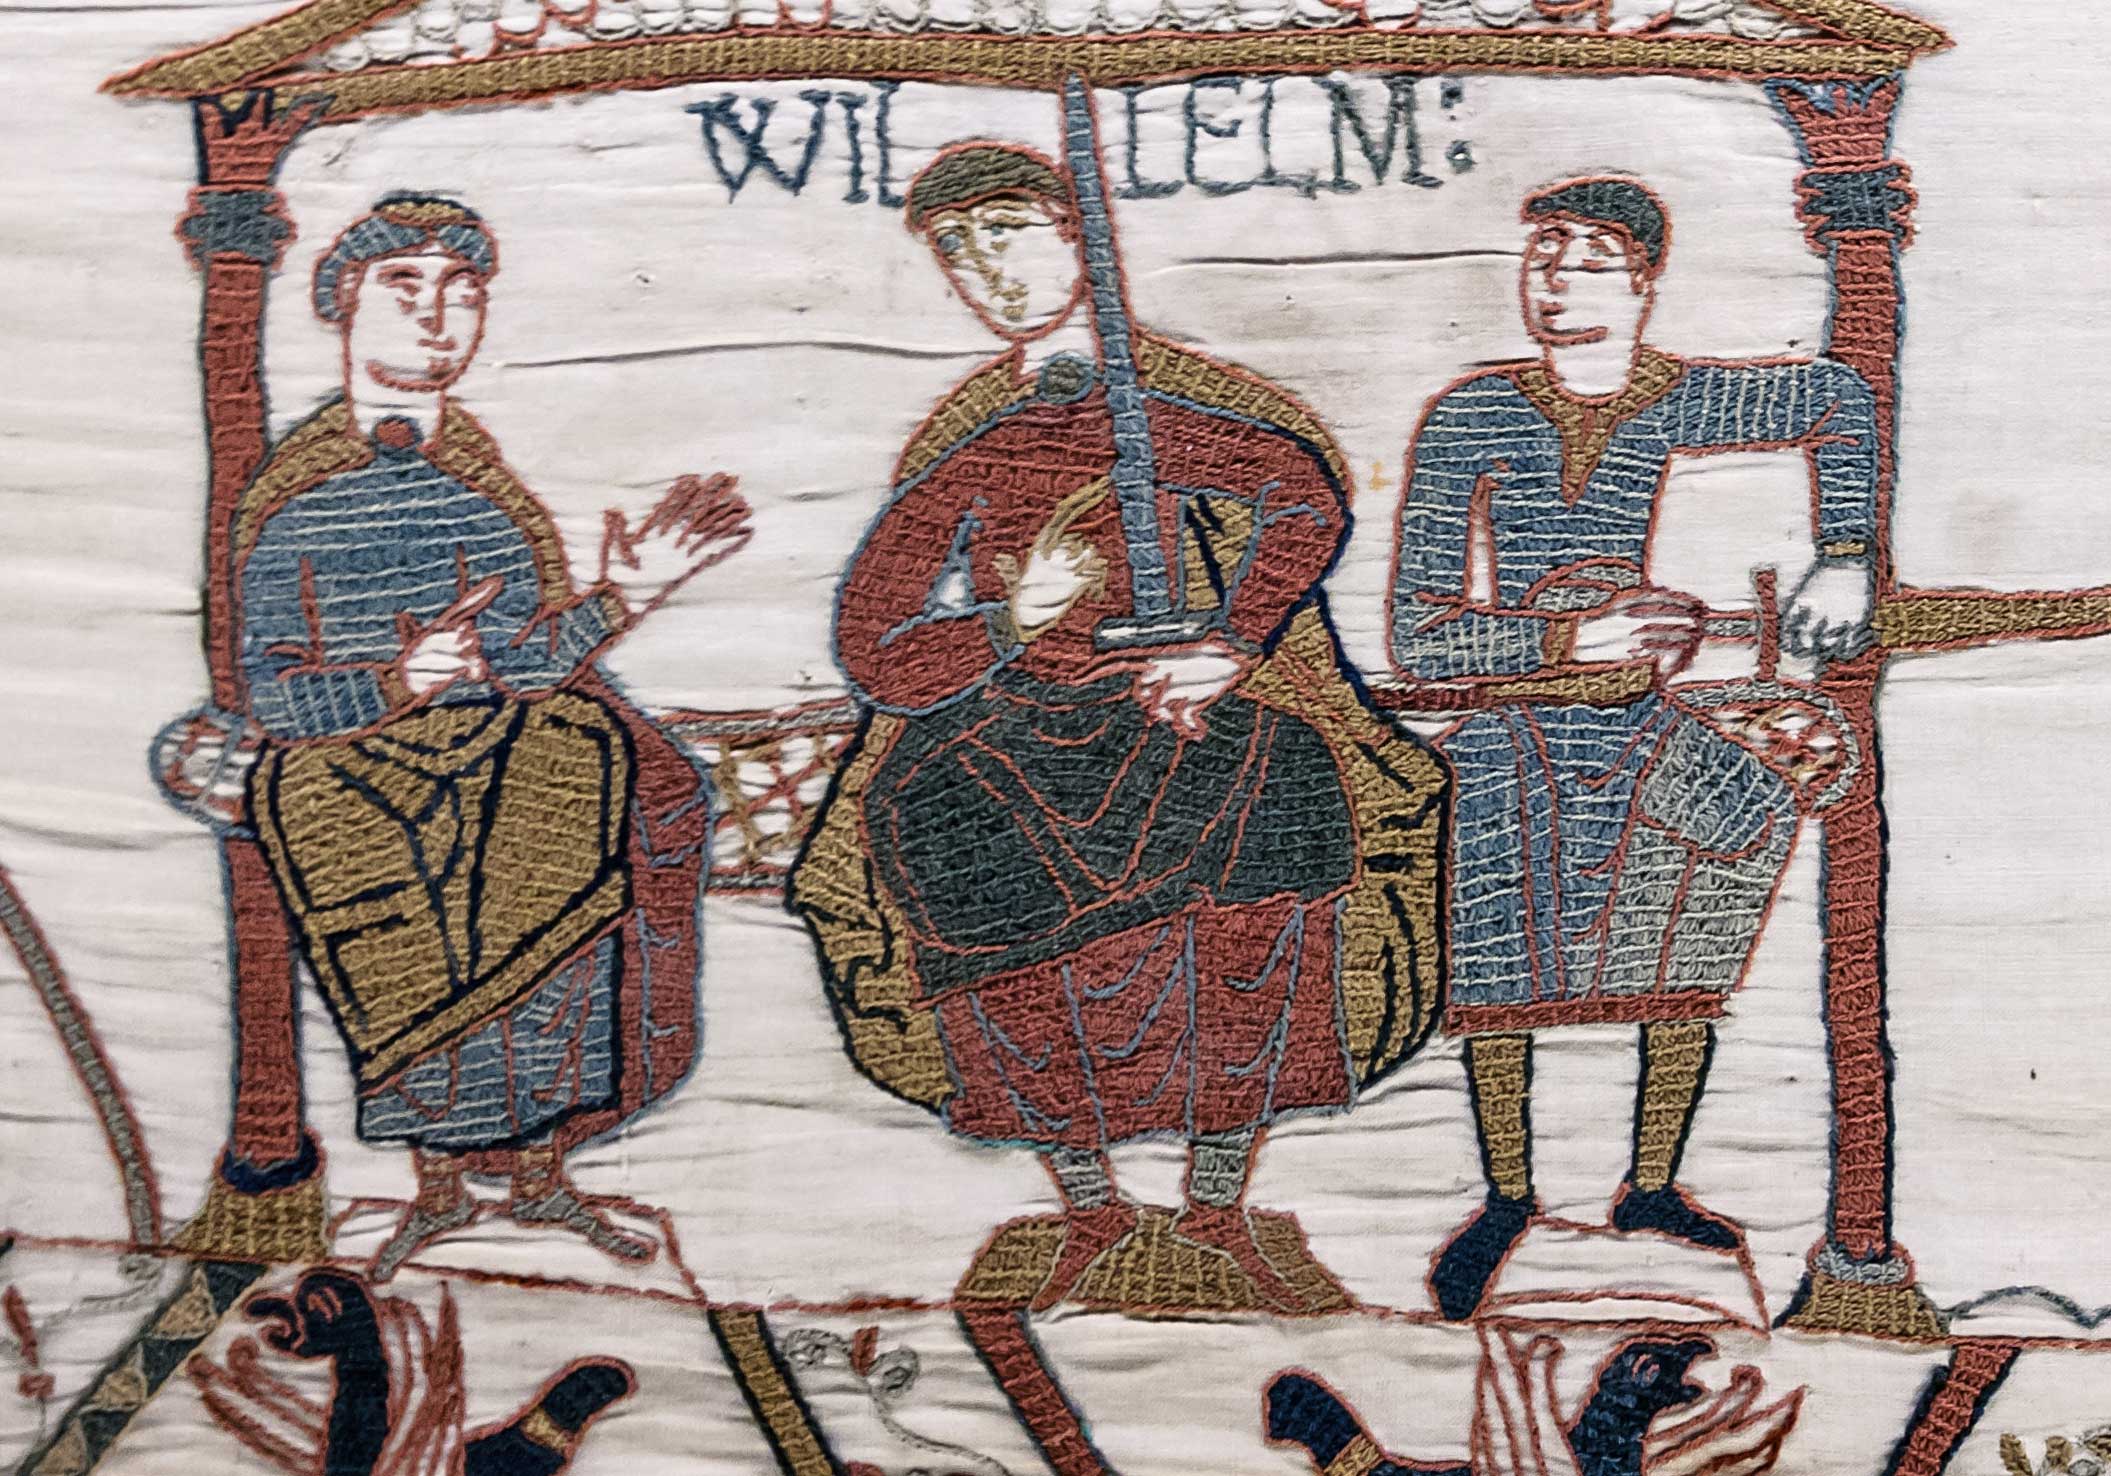 Scene 44 from the Bayeux Tapestry. Left to right: Bishop Odo of Bayeux, Duke William, Count Robert of Mortain. Wiki Commons/Myrabella